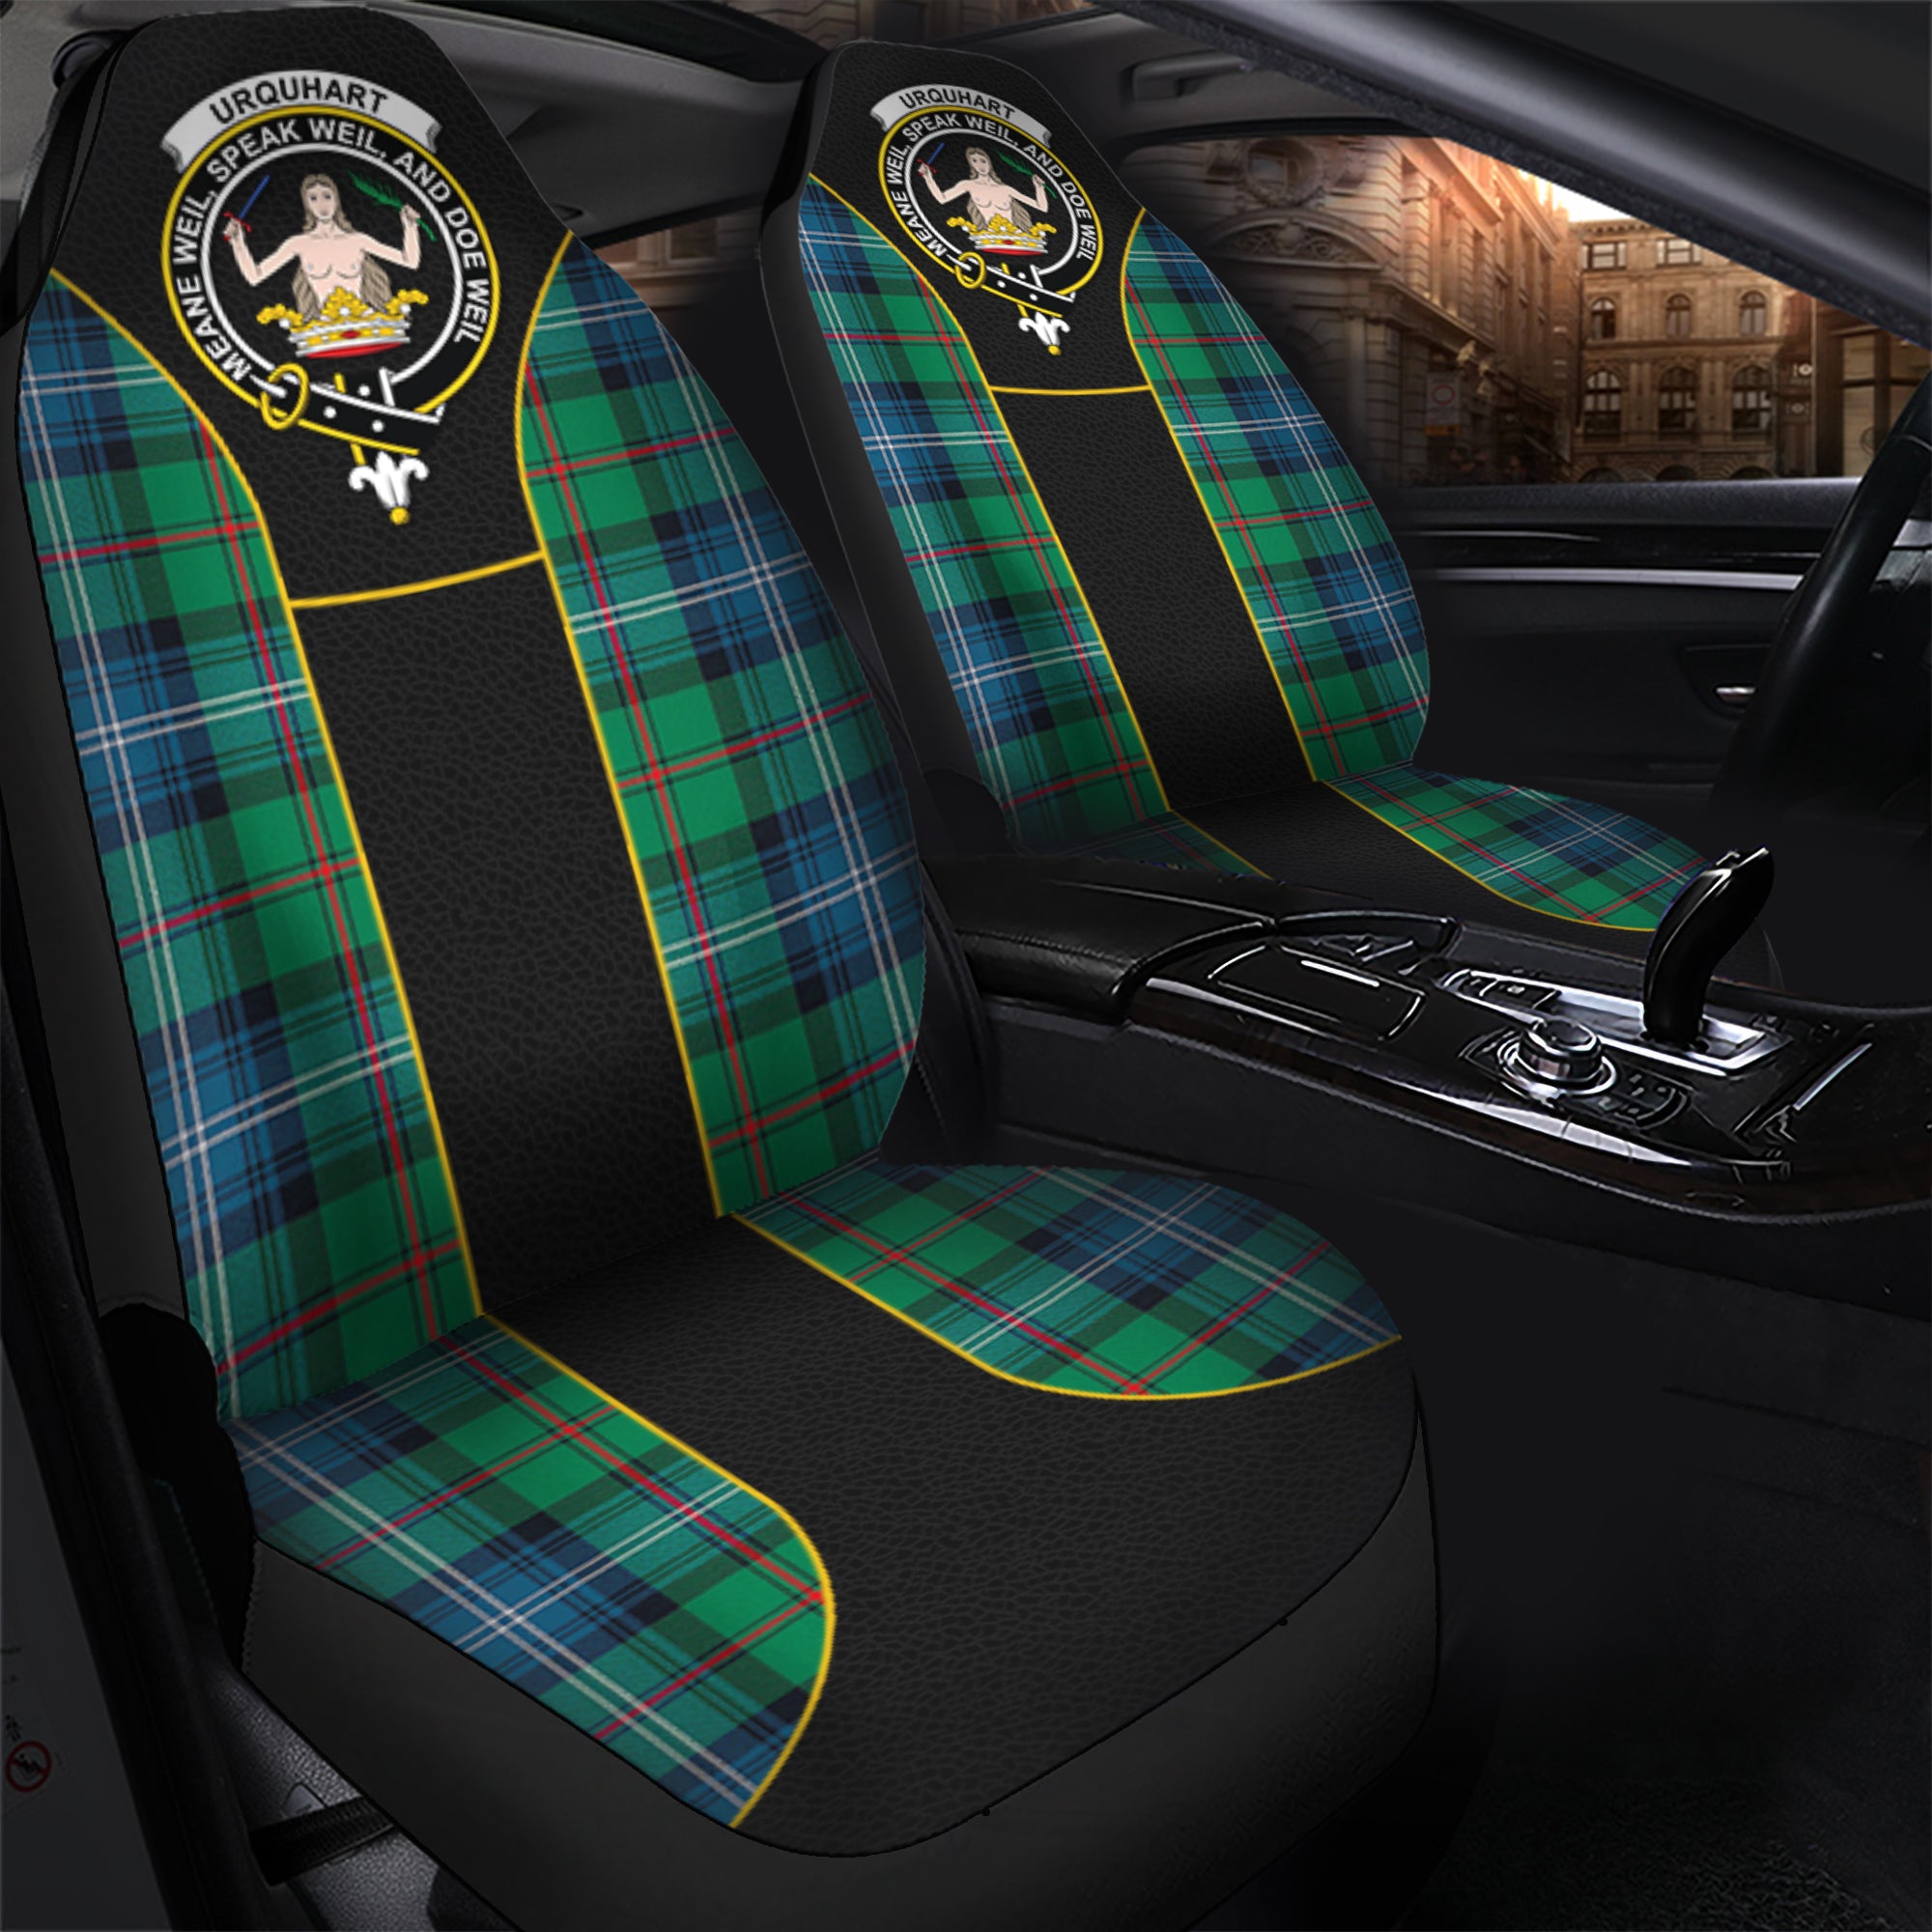 scottish-urquhart-ancient-tartan-crest-car-seat-cover-special-style